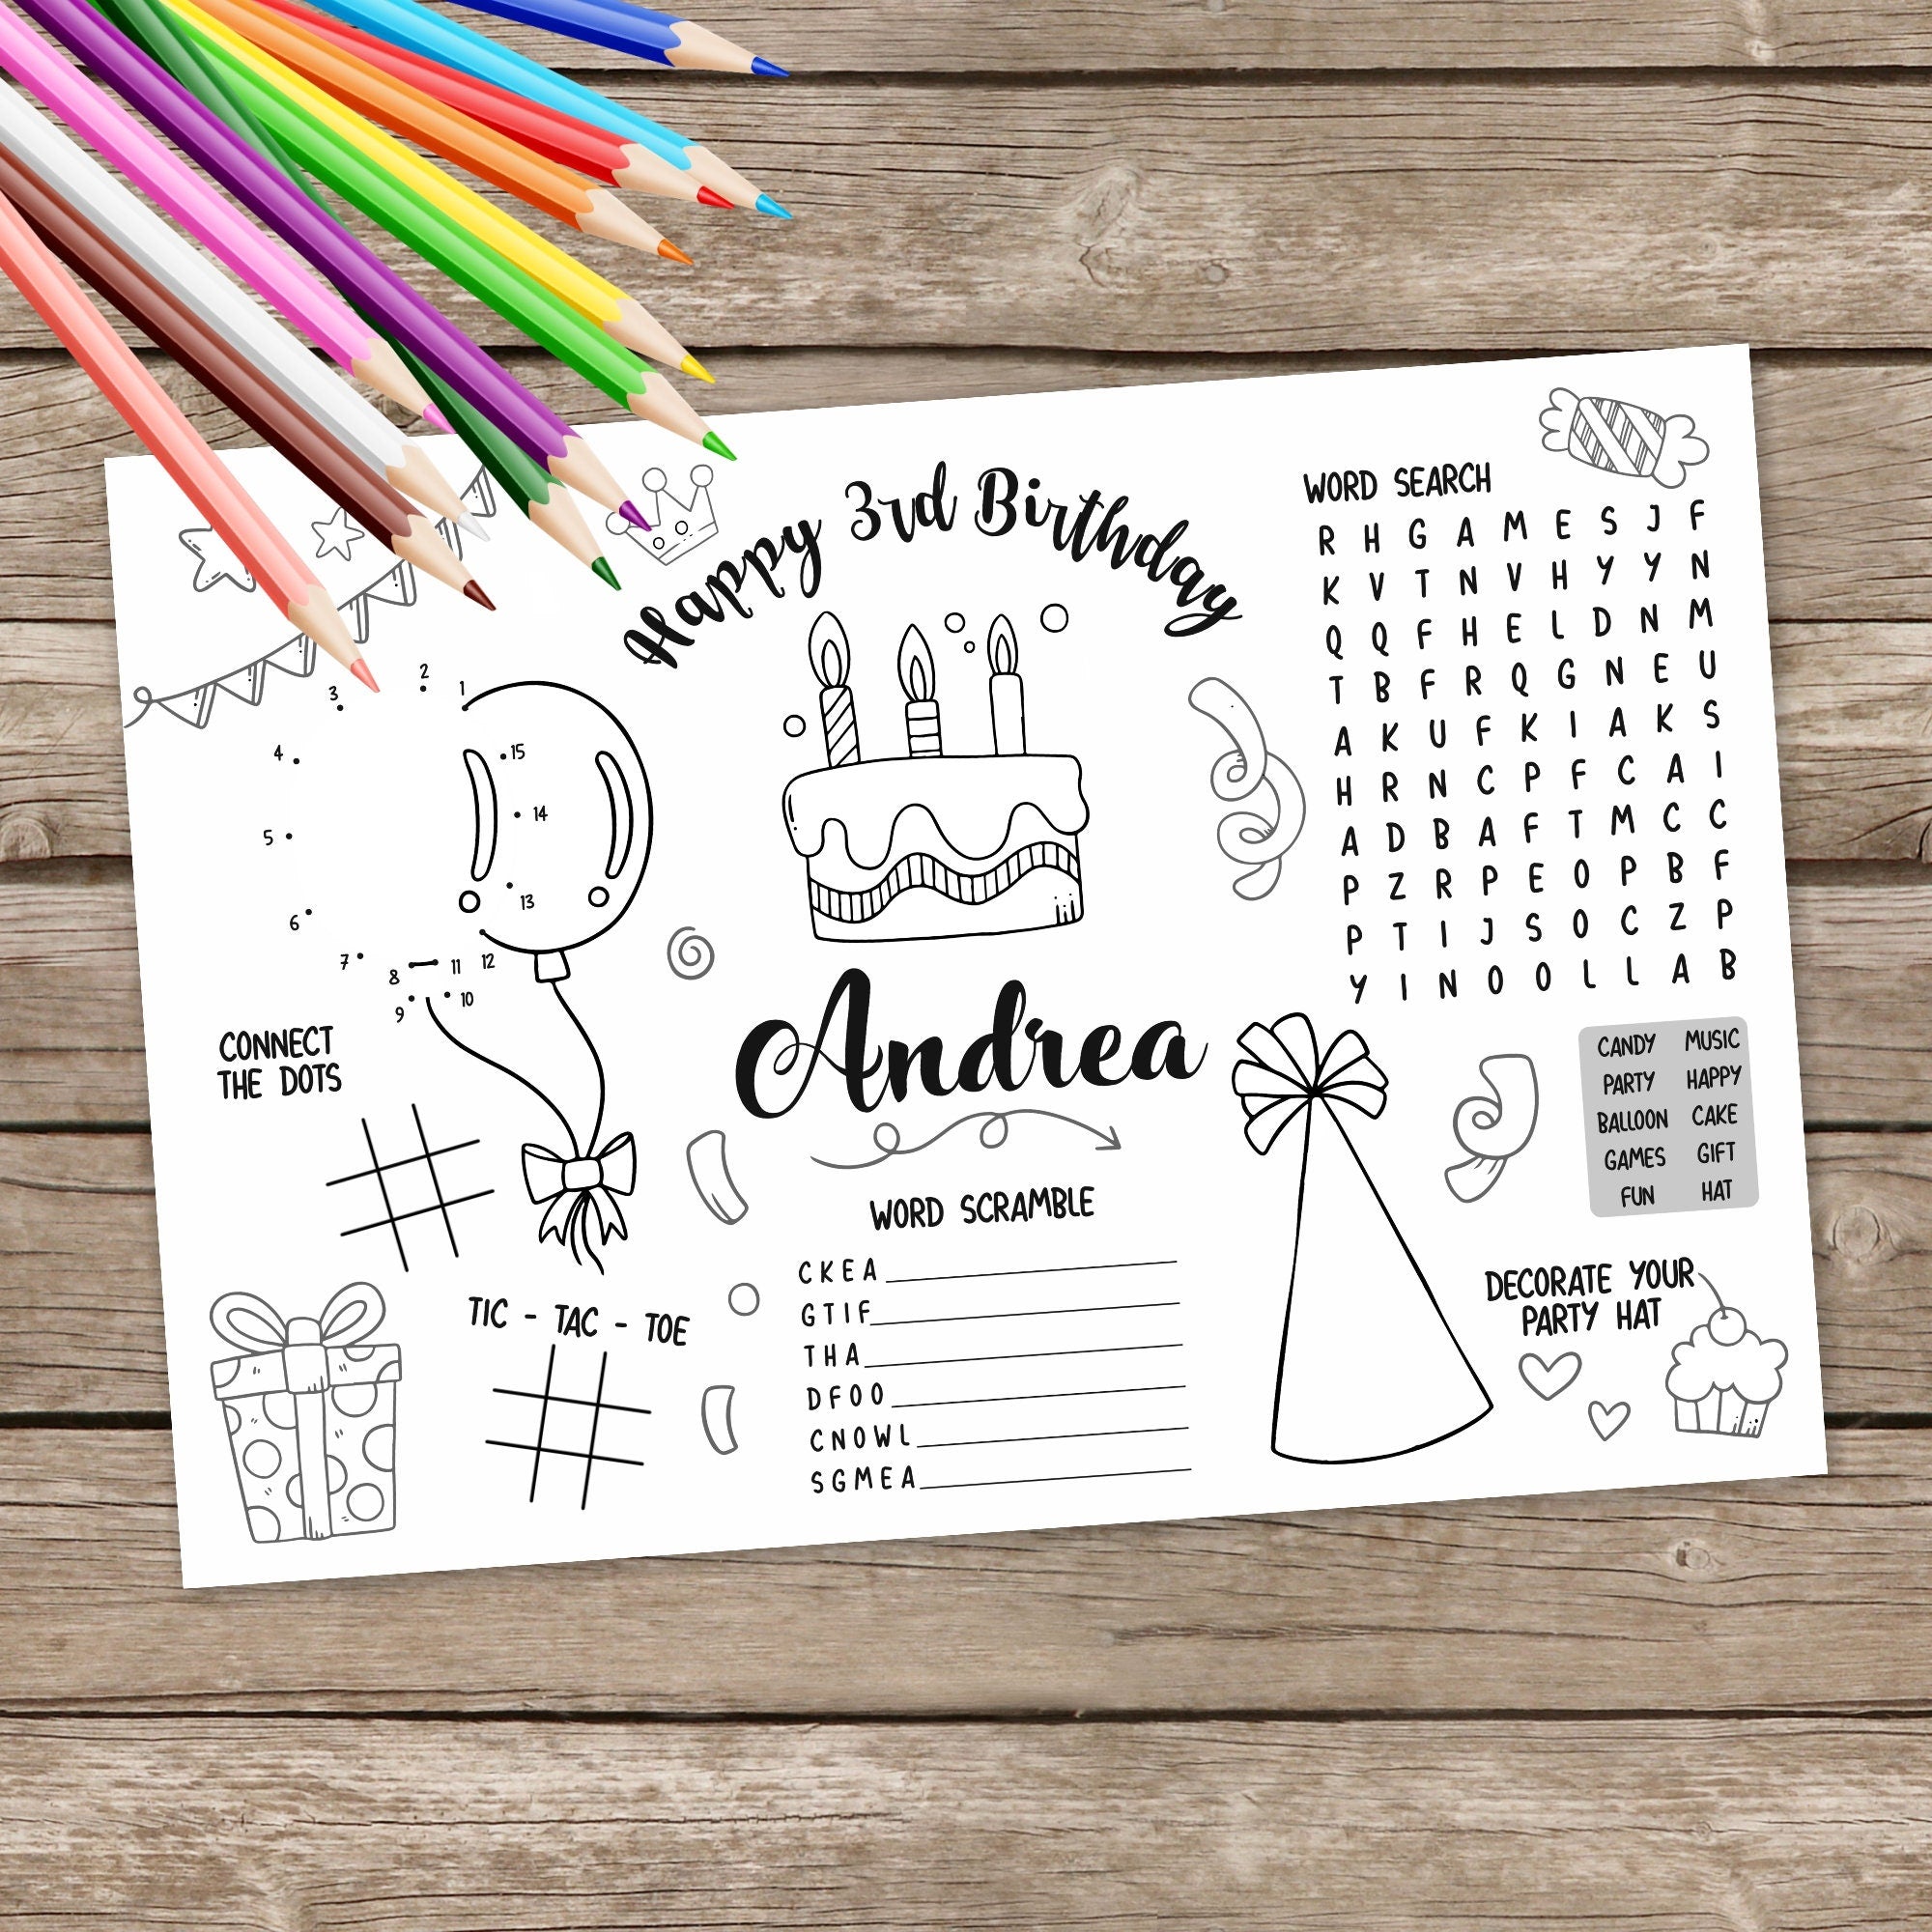 Personalized Activity Placemat